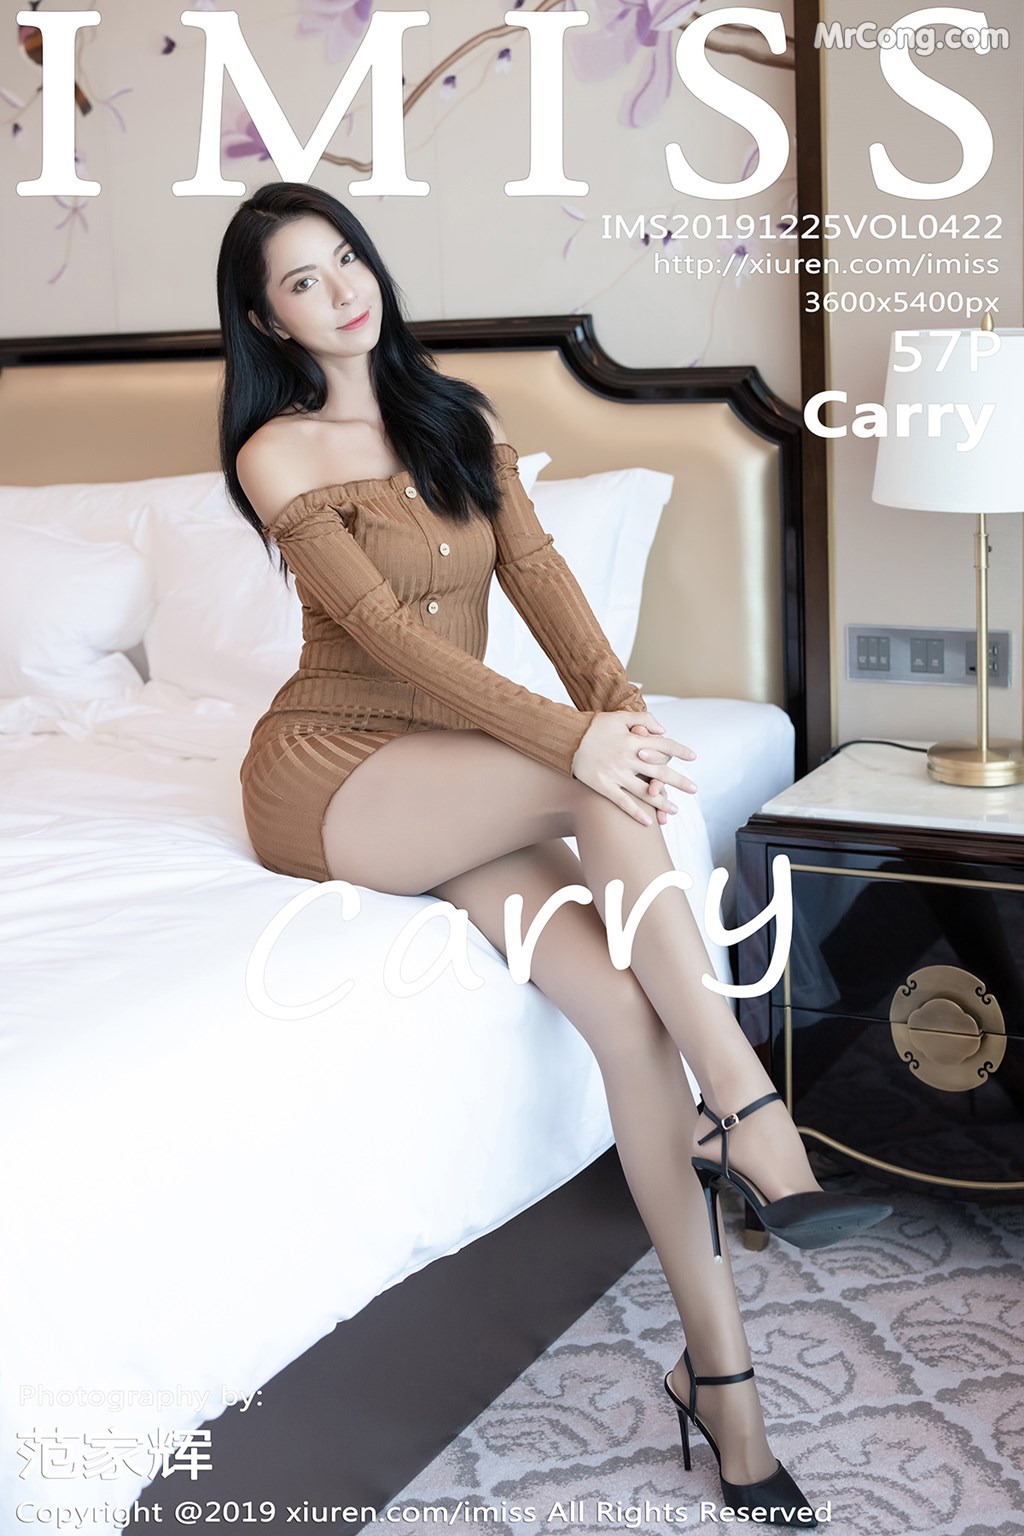 IMISS Vol.422: Carry (58 pictures) photo 1-0